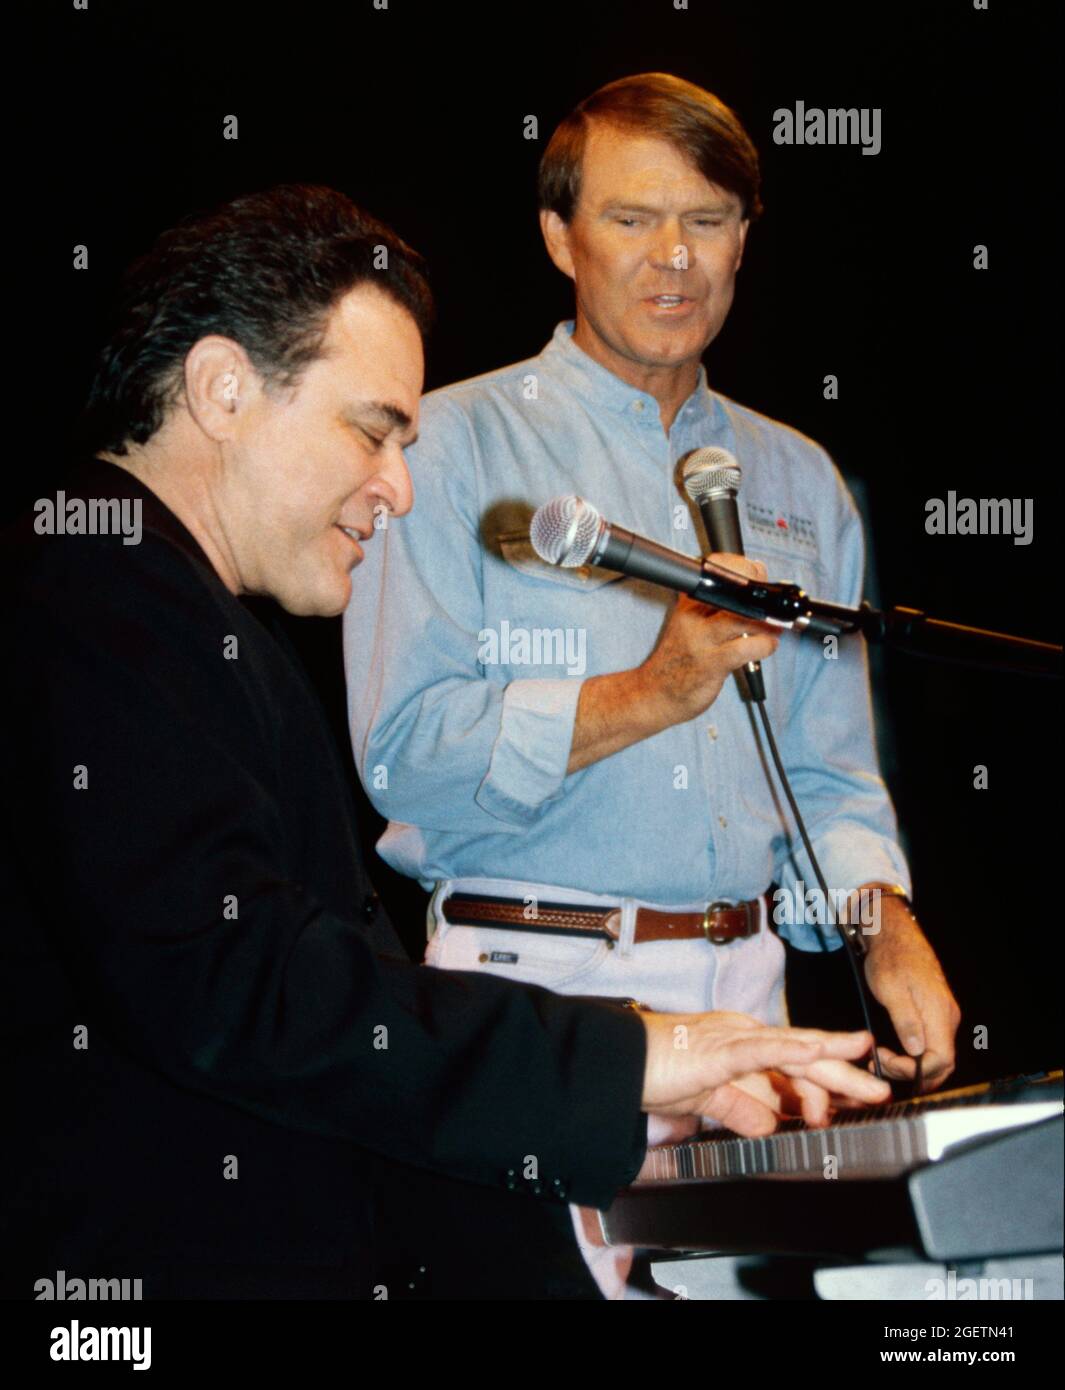 Glen Campbell and song writer, Larry Weiss on keyboard give an impromptu performance of “Rhinestone Cowboy” at Campbell's surprise 60th birthday celebration in Branson, Missouri on April 20, 1996, two days before his actual birthday. Stock Photo